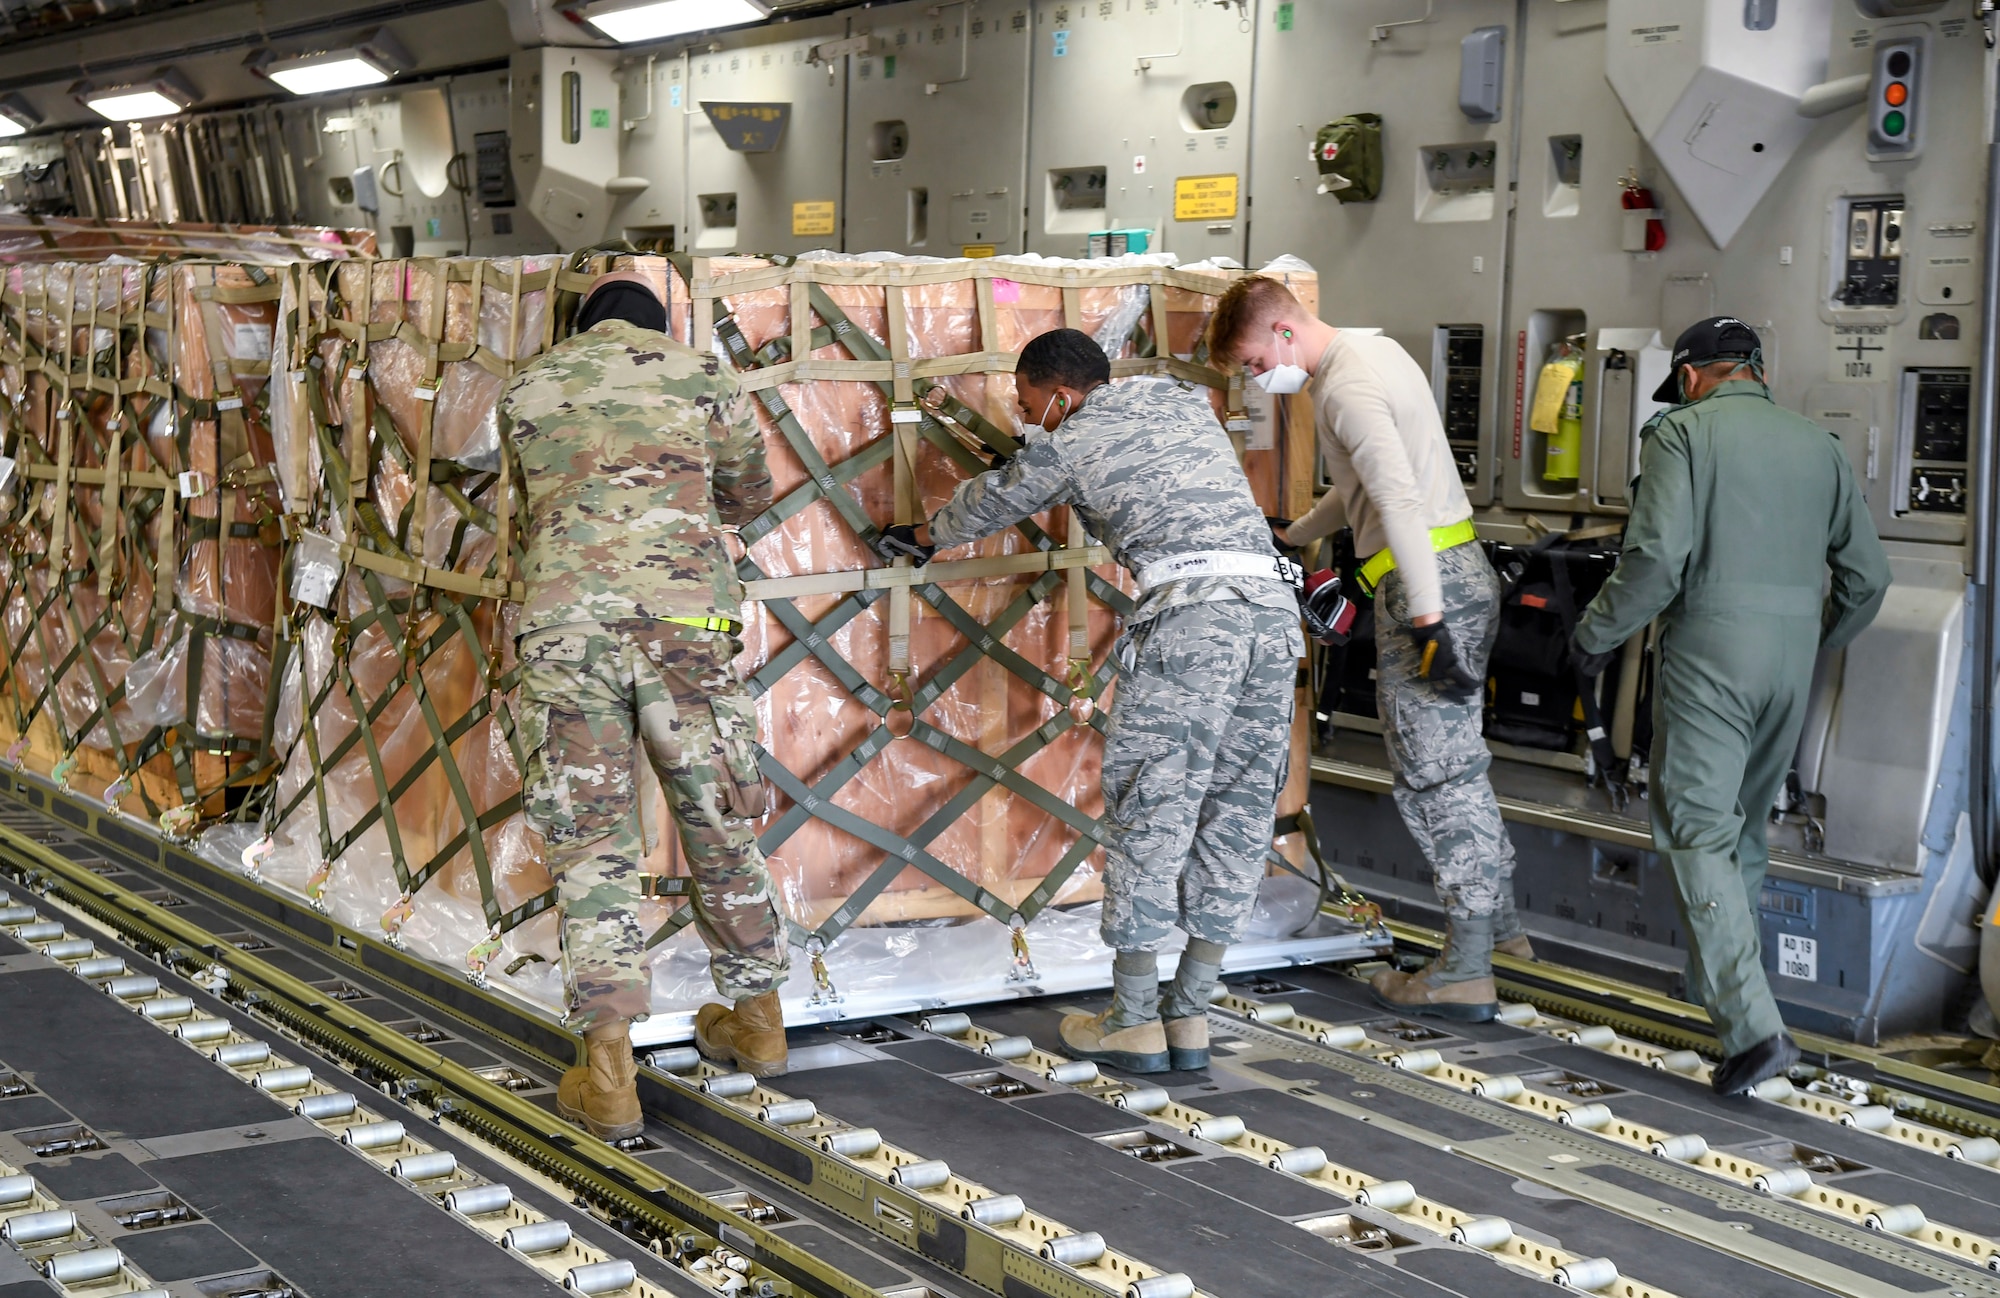 Airmen from the 436th Aerial Port Squadron move cargo onto an Indian air force C-17 Globemaster III at Dover Air Force Base, Delaware, Nov. 20, 2020. The U.S. strengthens its international partnerships through foreign military sales. Dover AFB actively supports $3.5 billion worth of FMS due to its strategic location and 436th Aerial Port Squadron, the largest aerial port in the Department of Defense. As the world’s oldest and largest democracies, the United States and India share a commitment to freedom, human rights and rule of law. (U.S. Air Force photo by Senior Airman Christopher Quail)